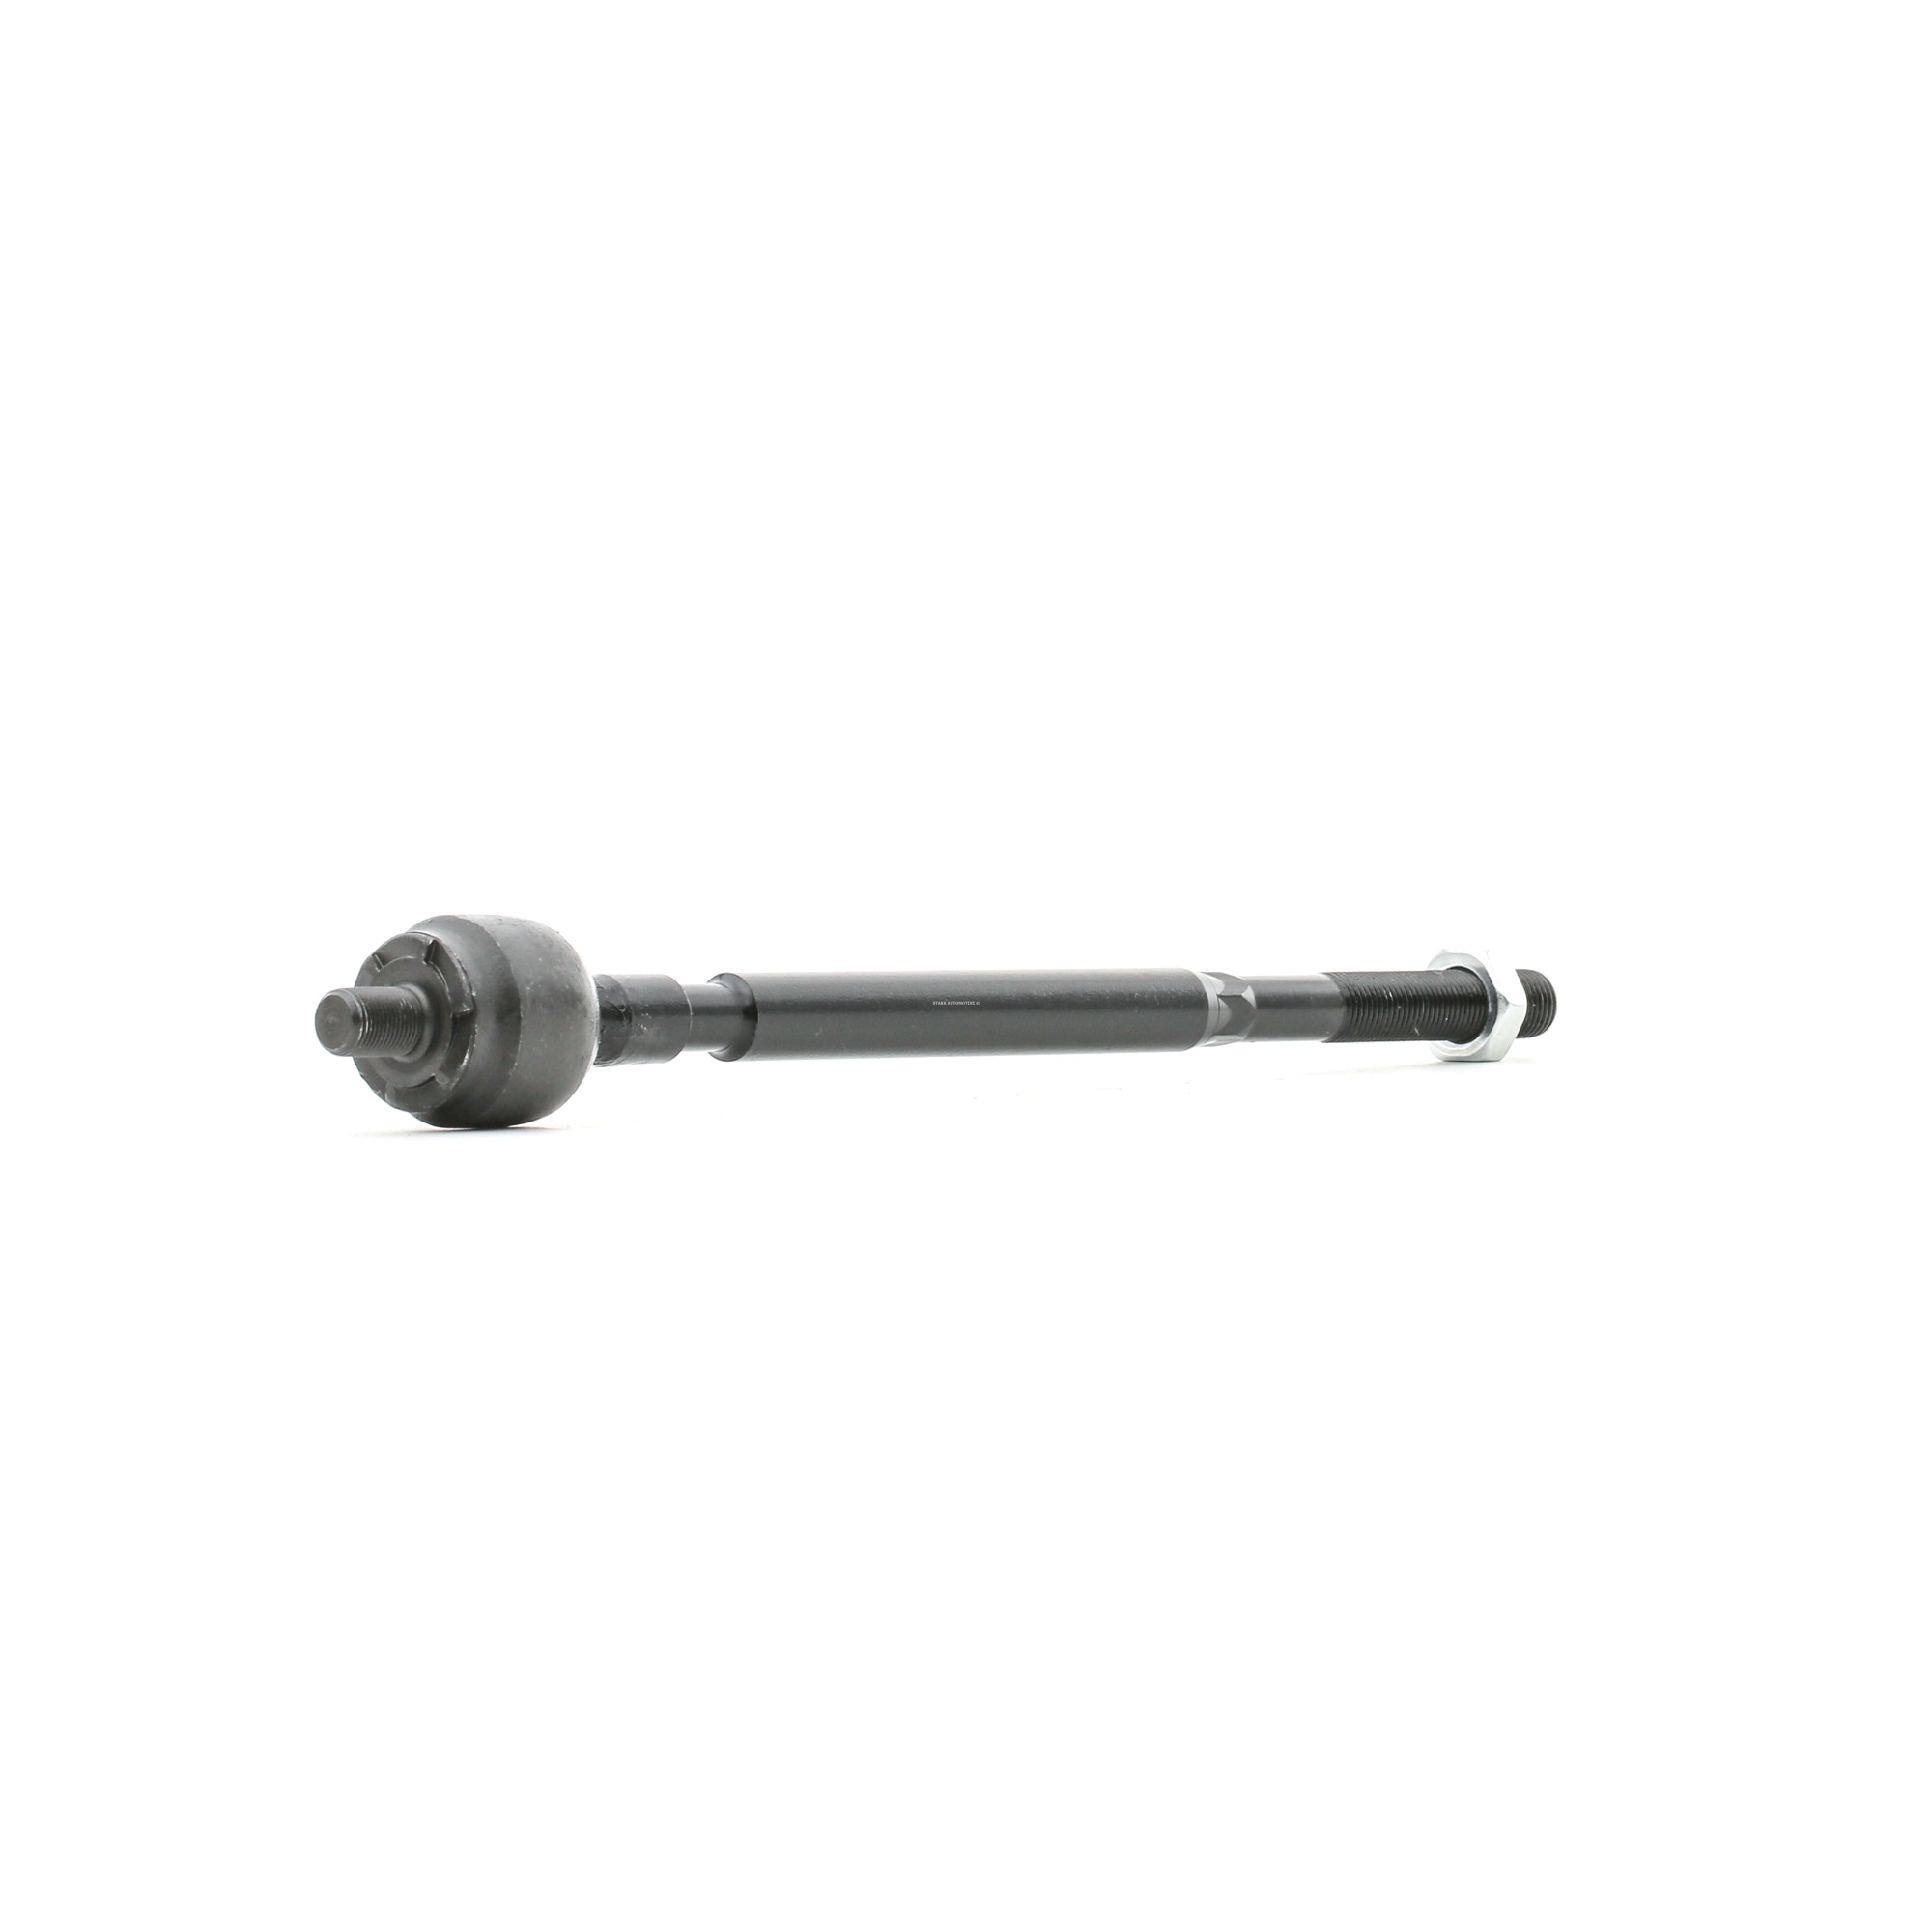 STARK Front axle both sides, Front Axle, M12X1.0 RHT, 303 mm Length: 303mm Tie rod axle joint SKTR-0240179 buy